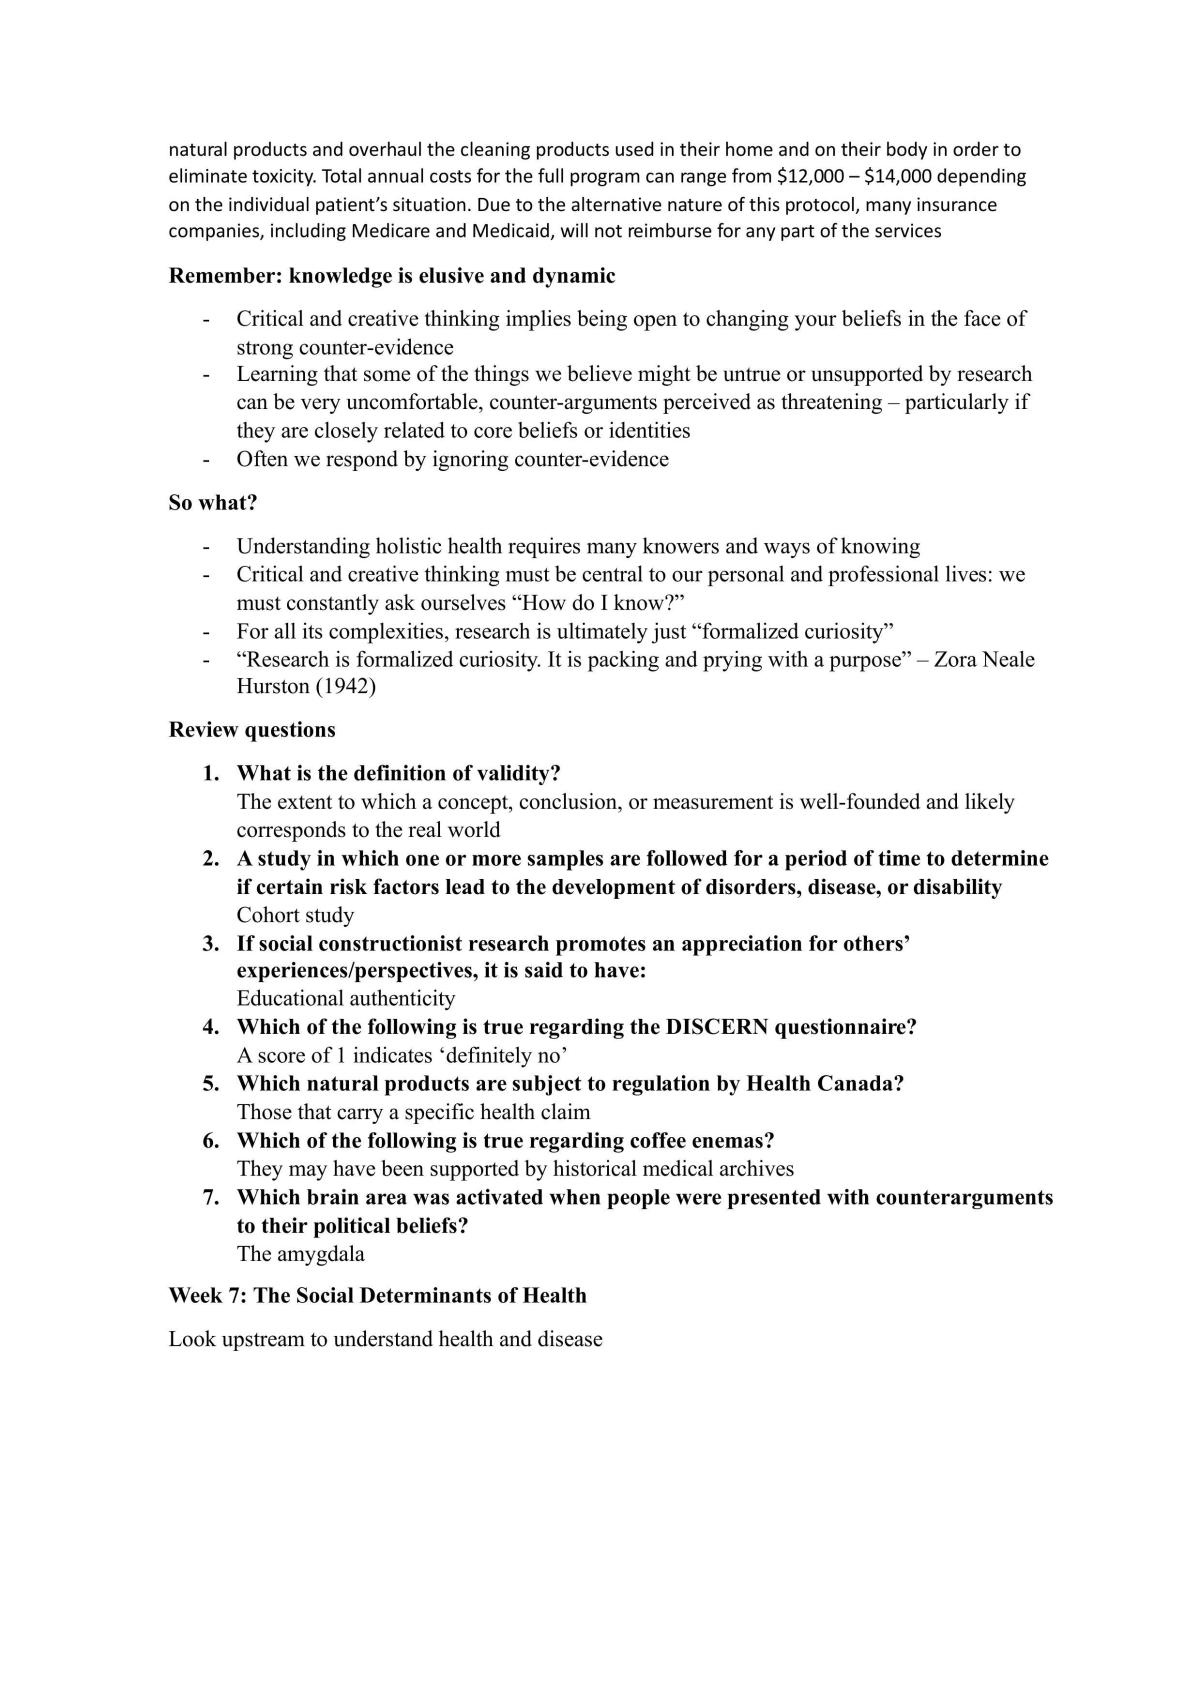 Study Guide for Introduction to Health Studies - Page 41